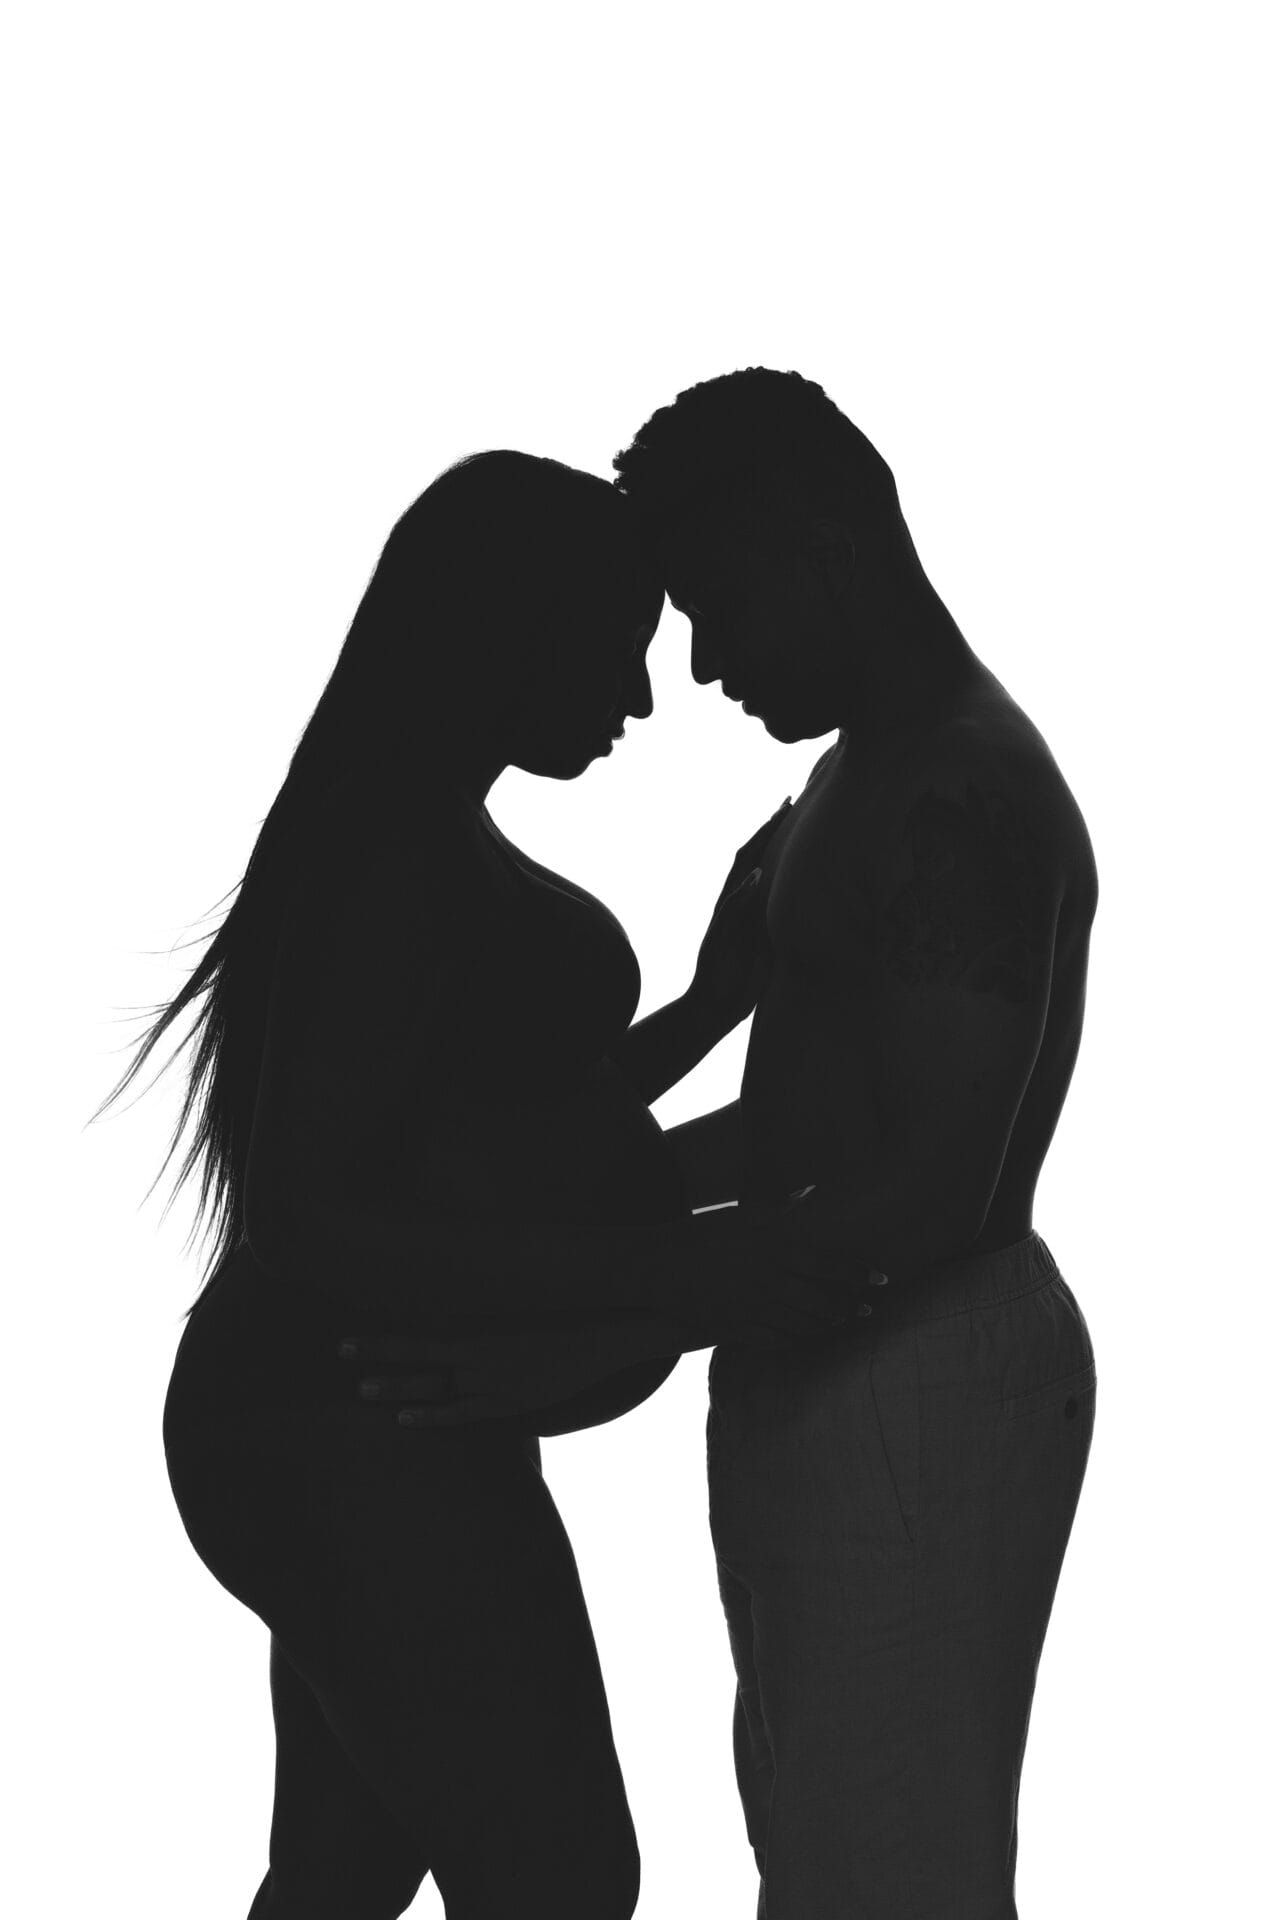 A couple, embracing affectionately New Orleans photographer capturing the essence of their pregnancy journey and the anticipation of welcoming their newborn baby.